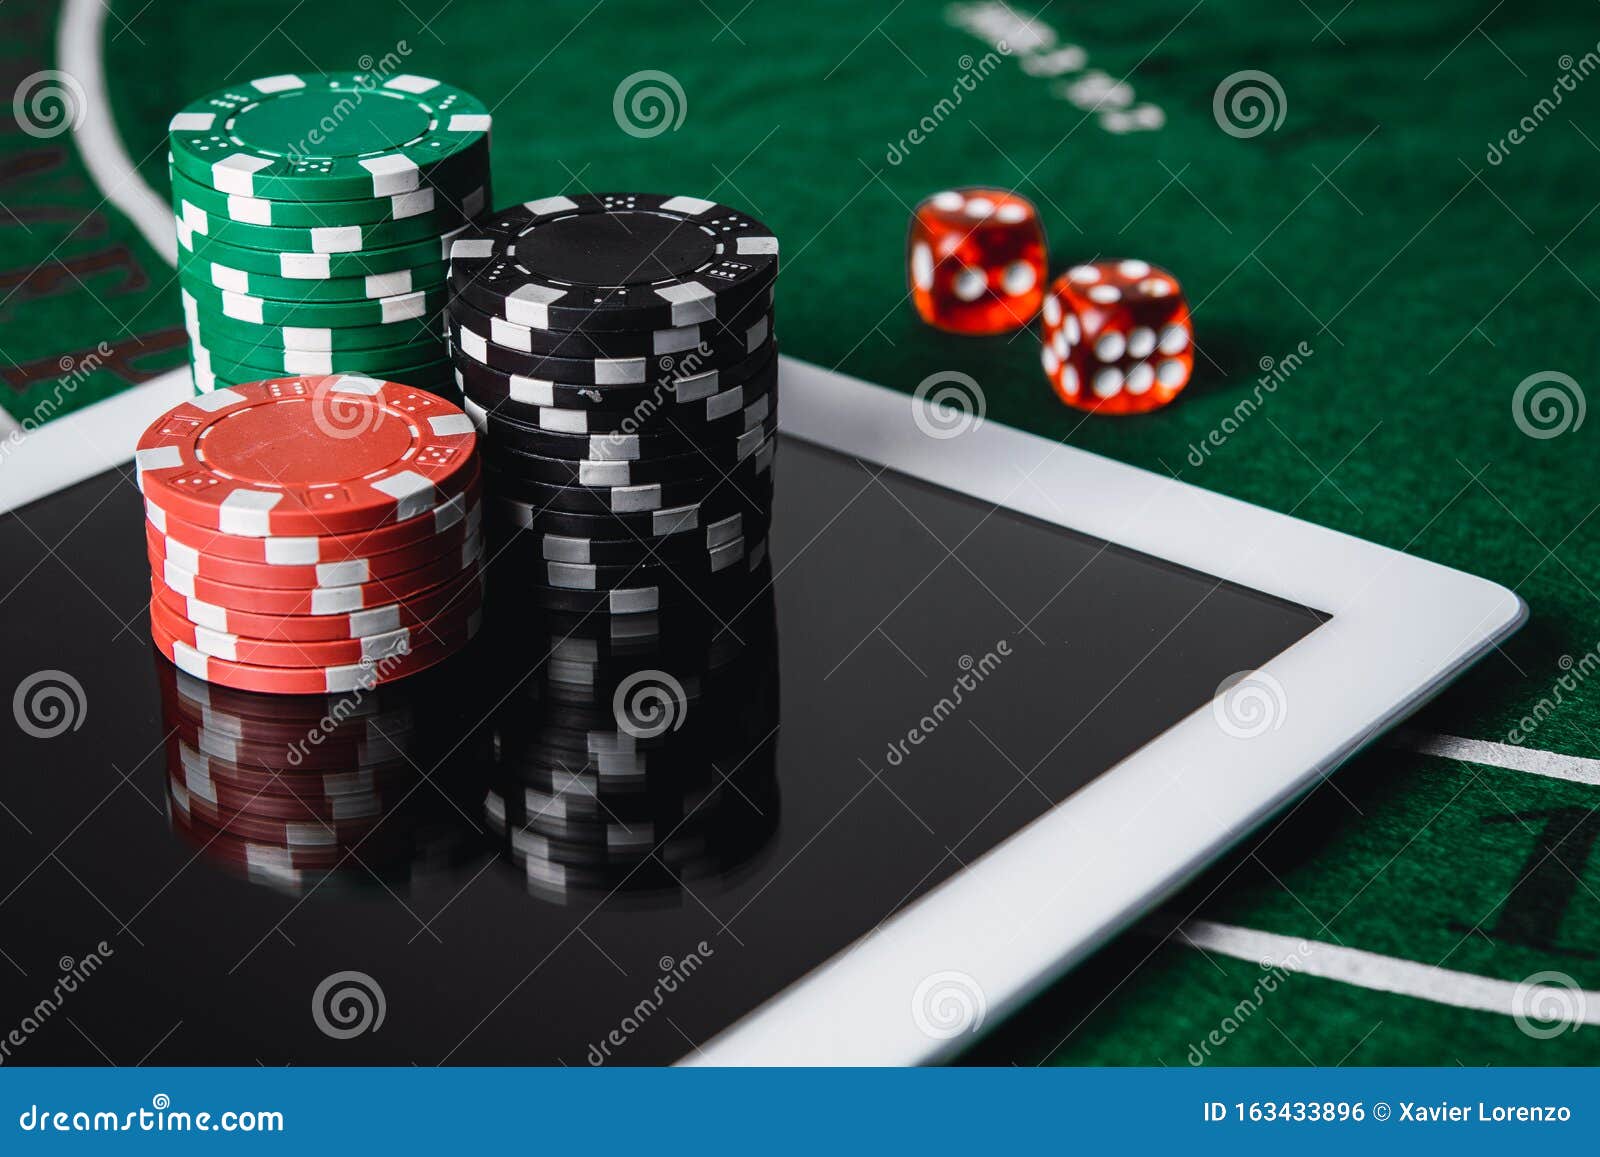 5 Secrets: How To Use best online casino To Create A Successful Business